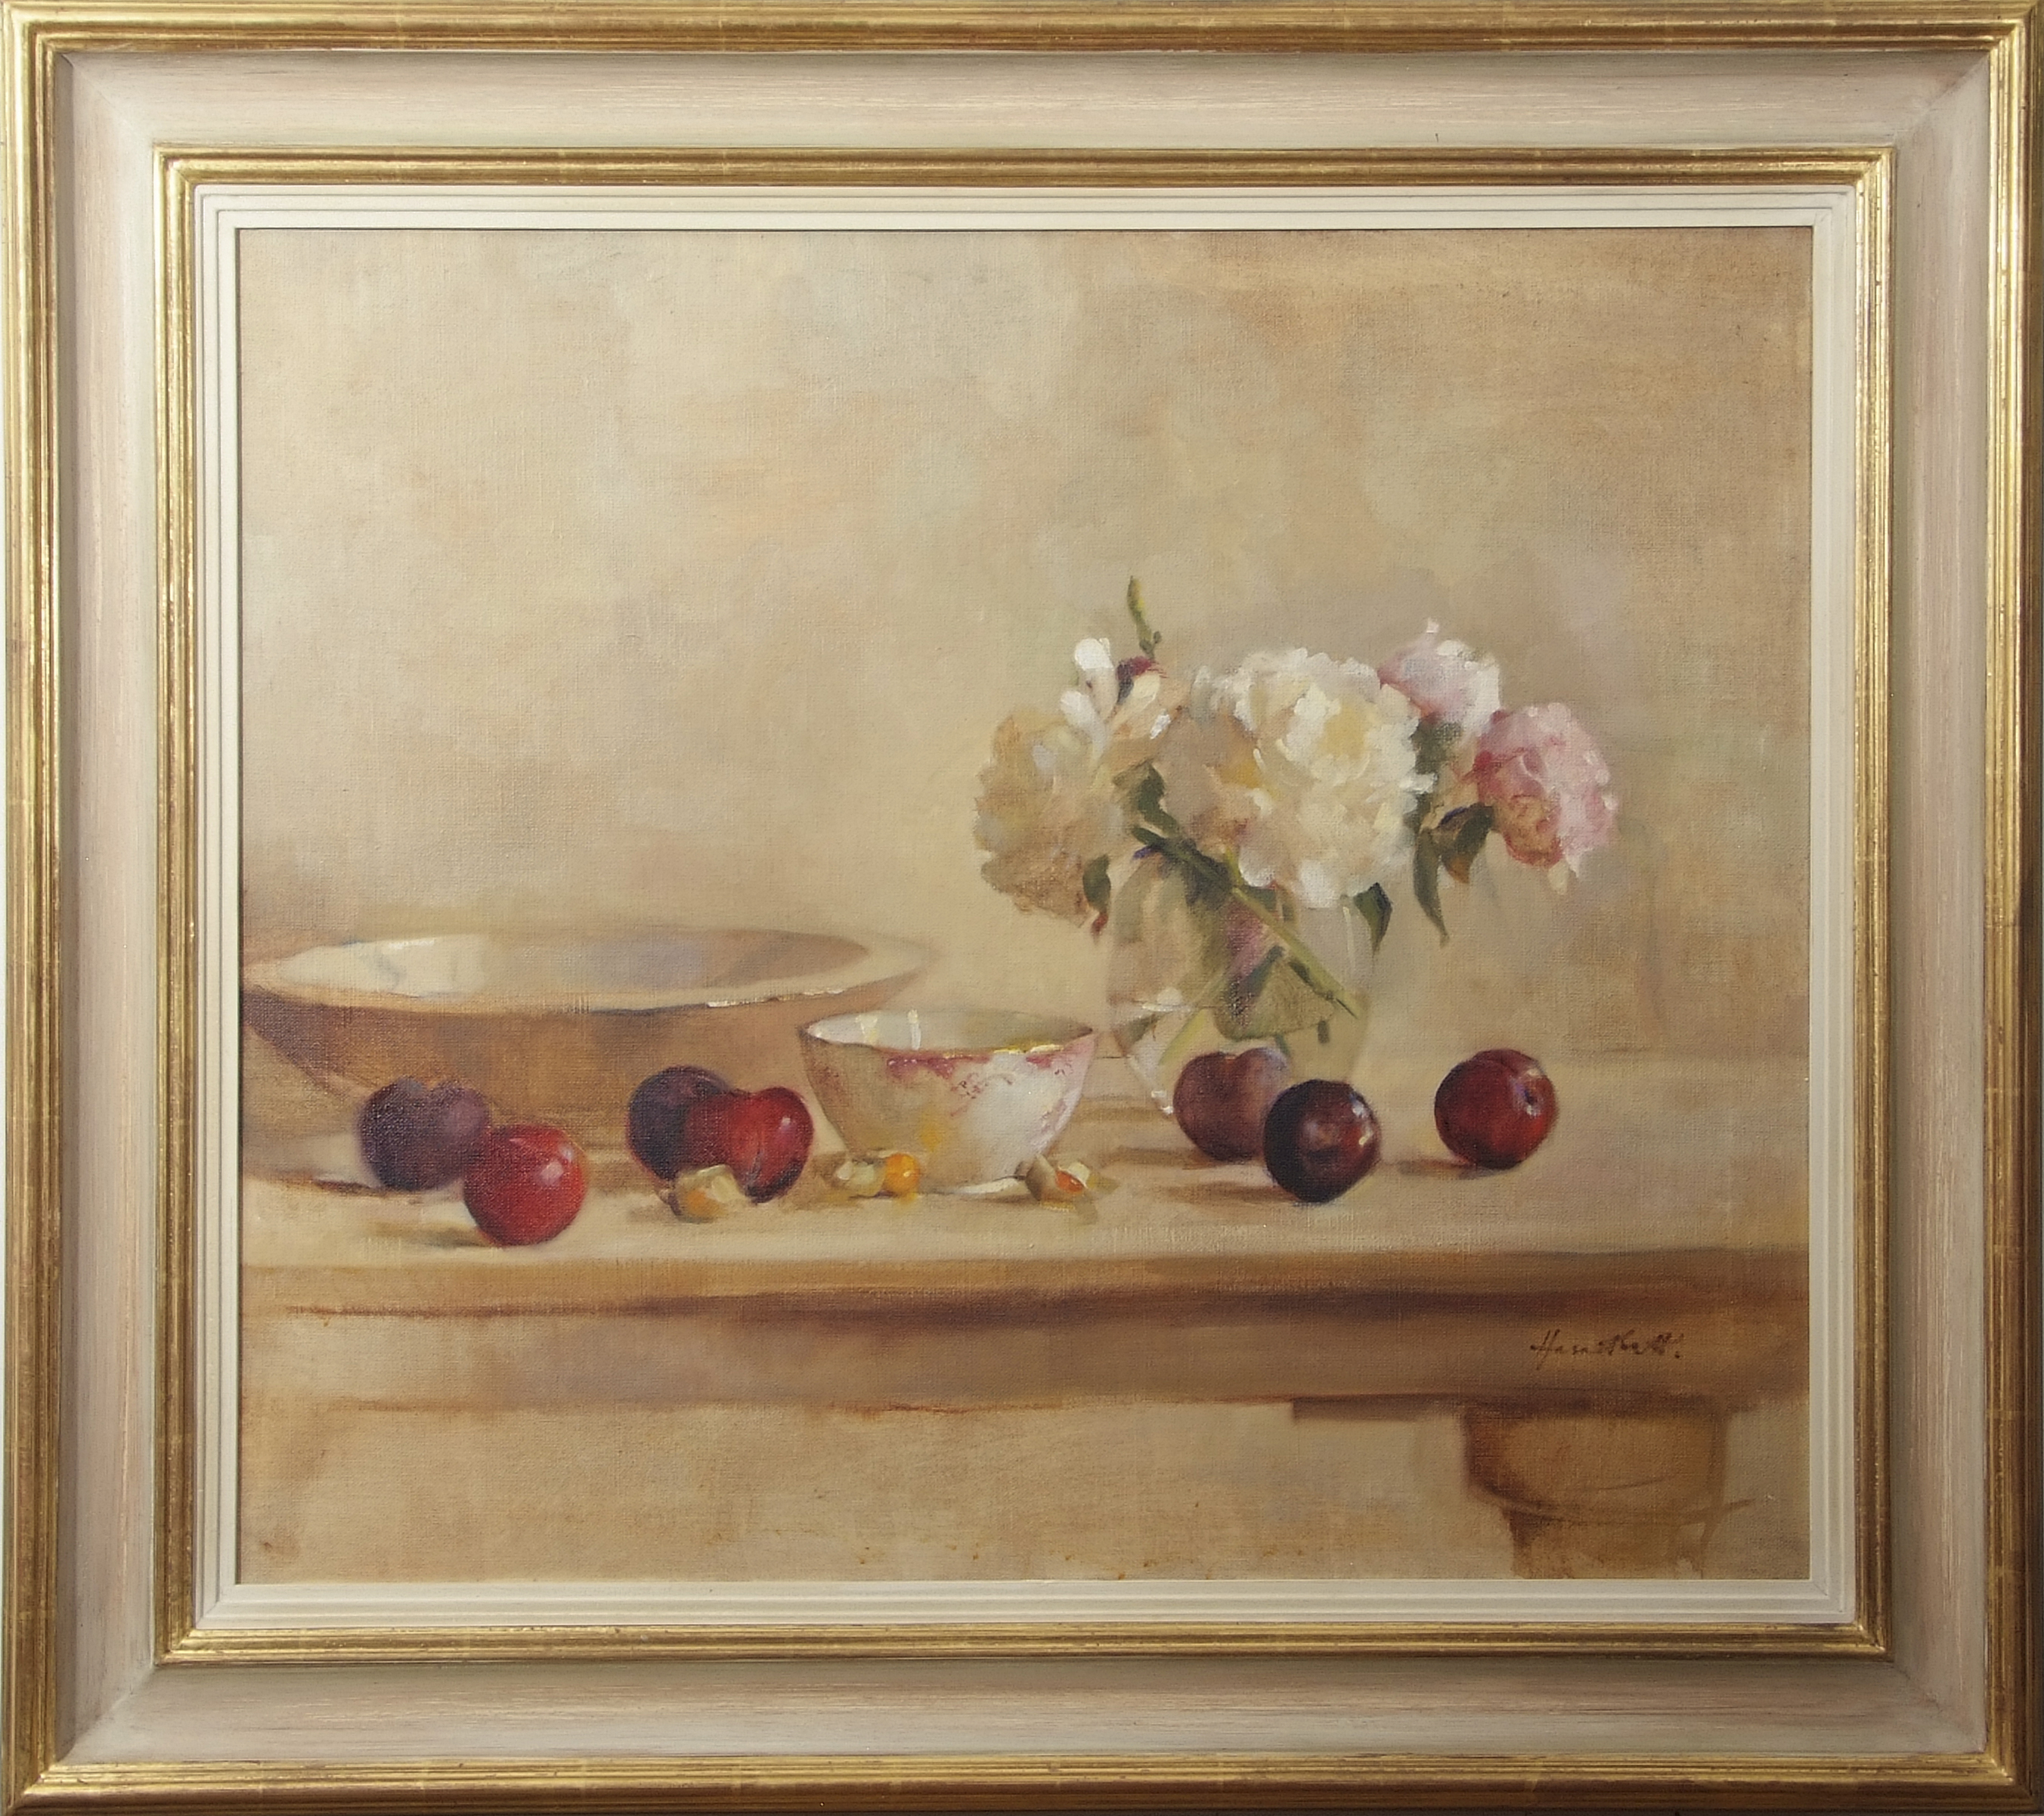 •AR Harriet Salt (born 1975), "Peonies and Plums", oil on canvas, signed lower right, 64 x 74cm.